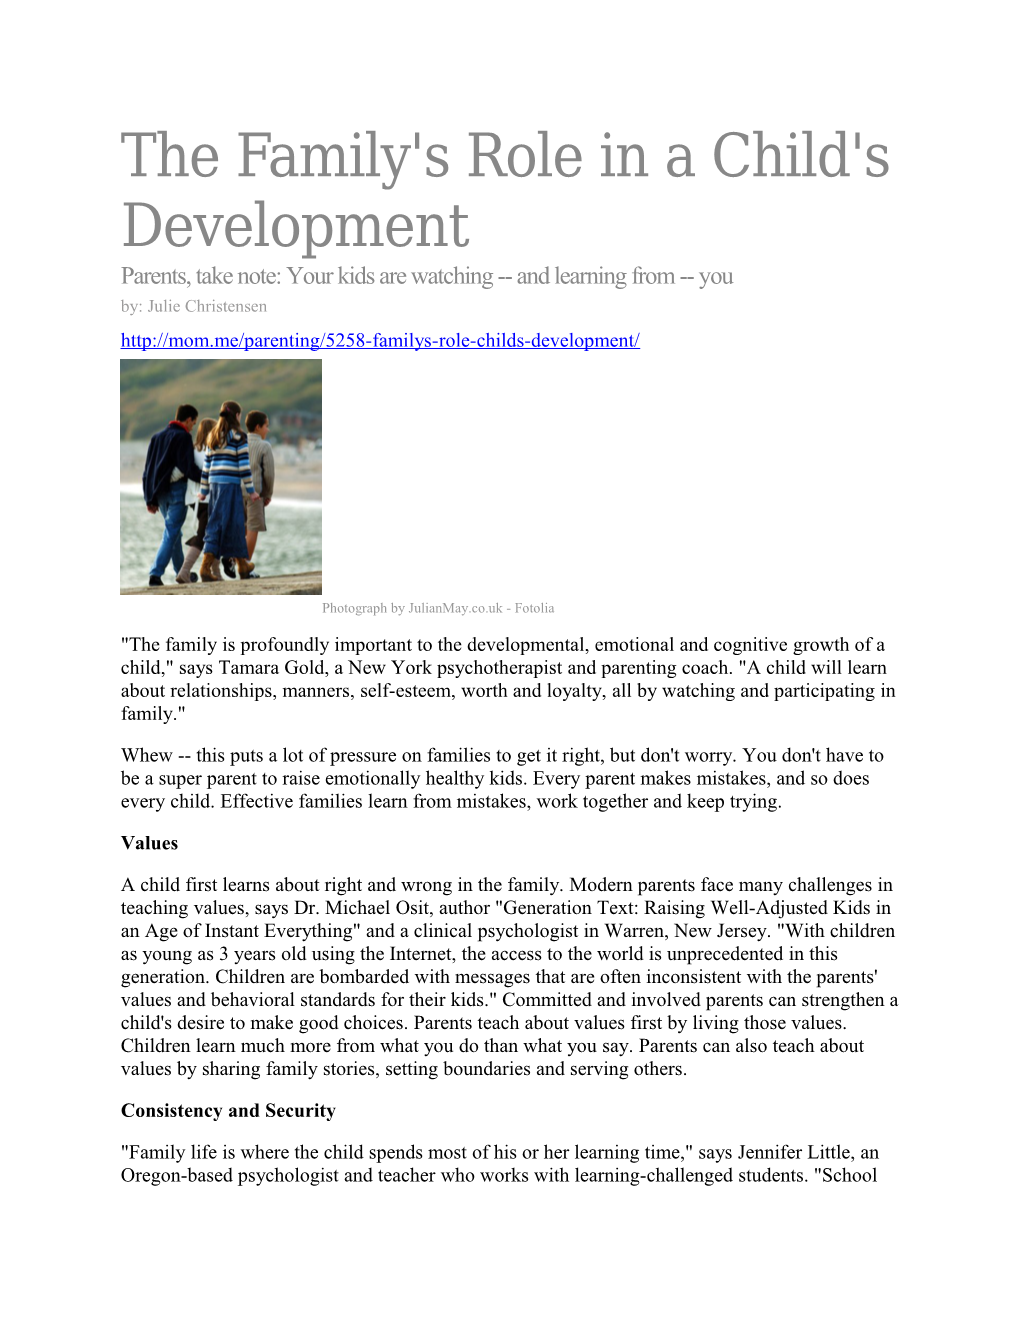 The Family's Role in a Child's Development